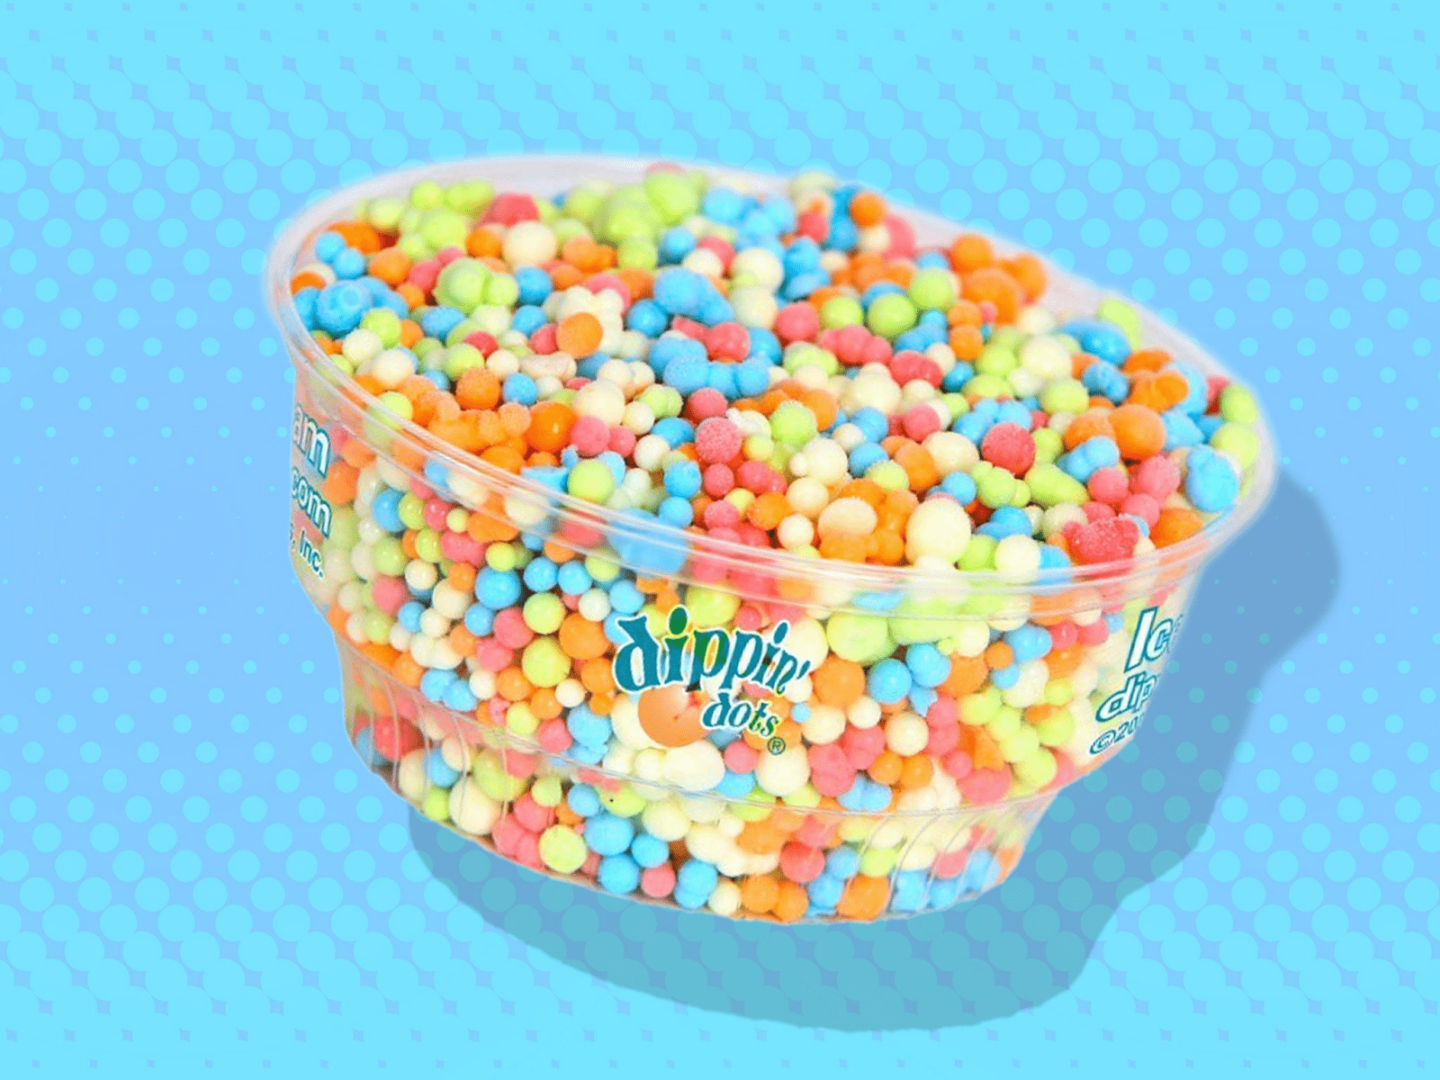 How Dippin' Dots Went From Bankruptcy to a $222M Acquisition